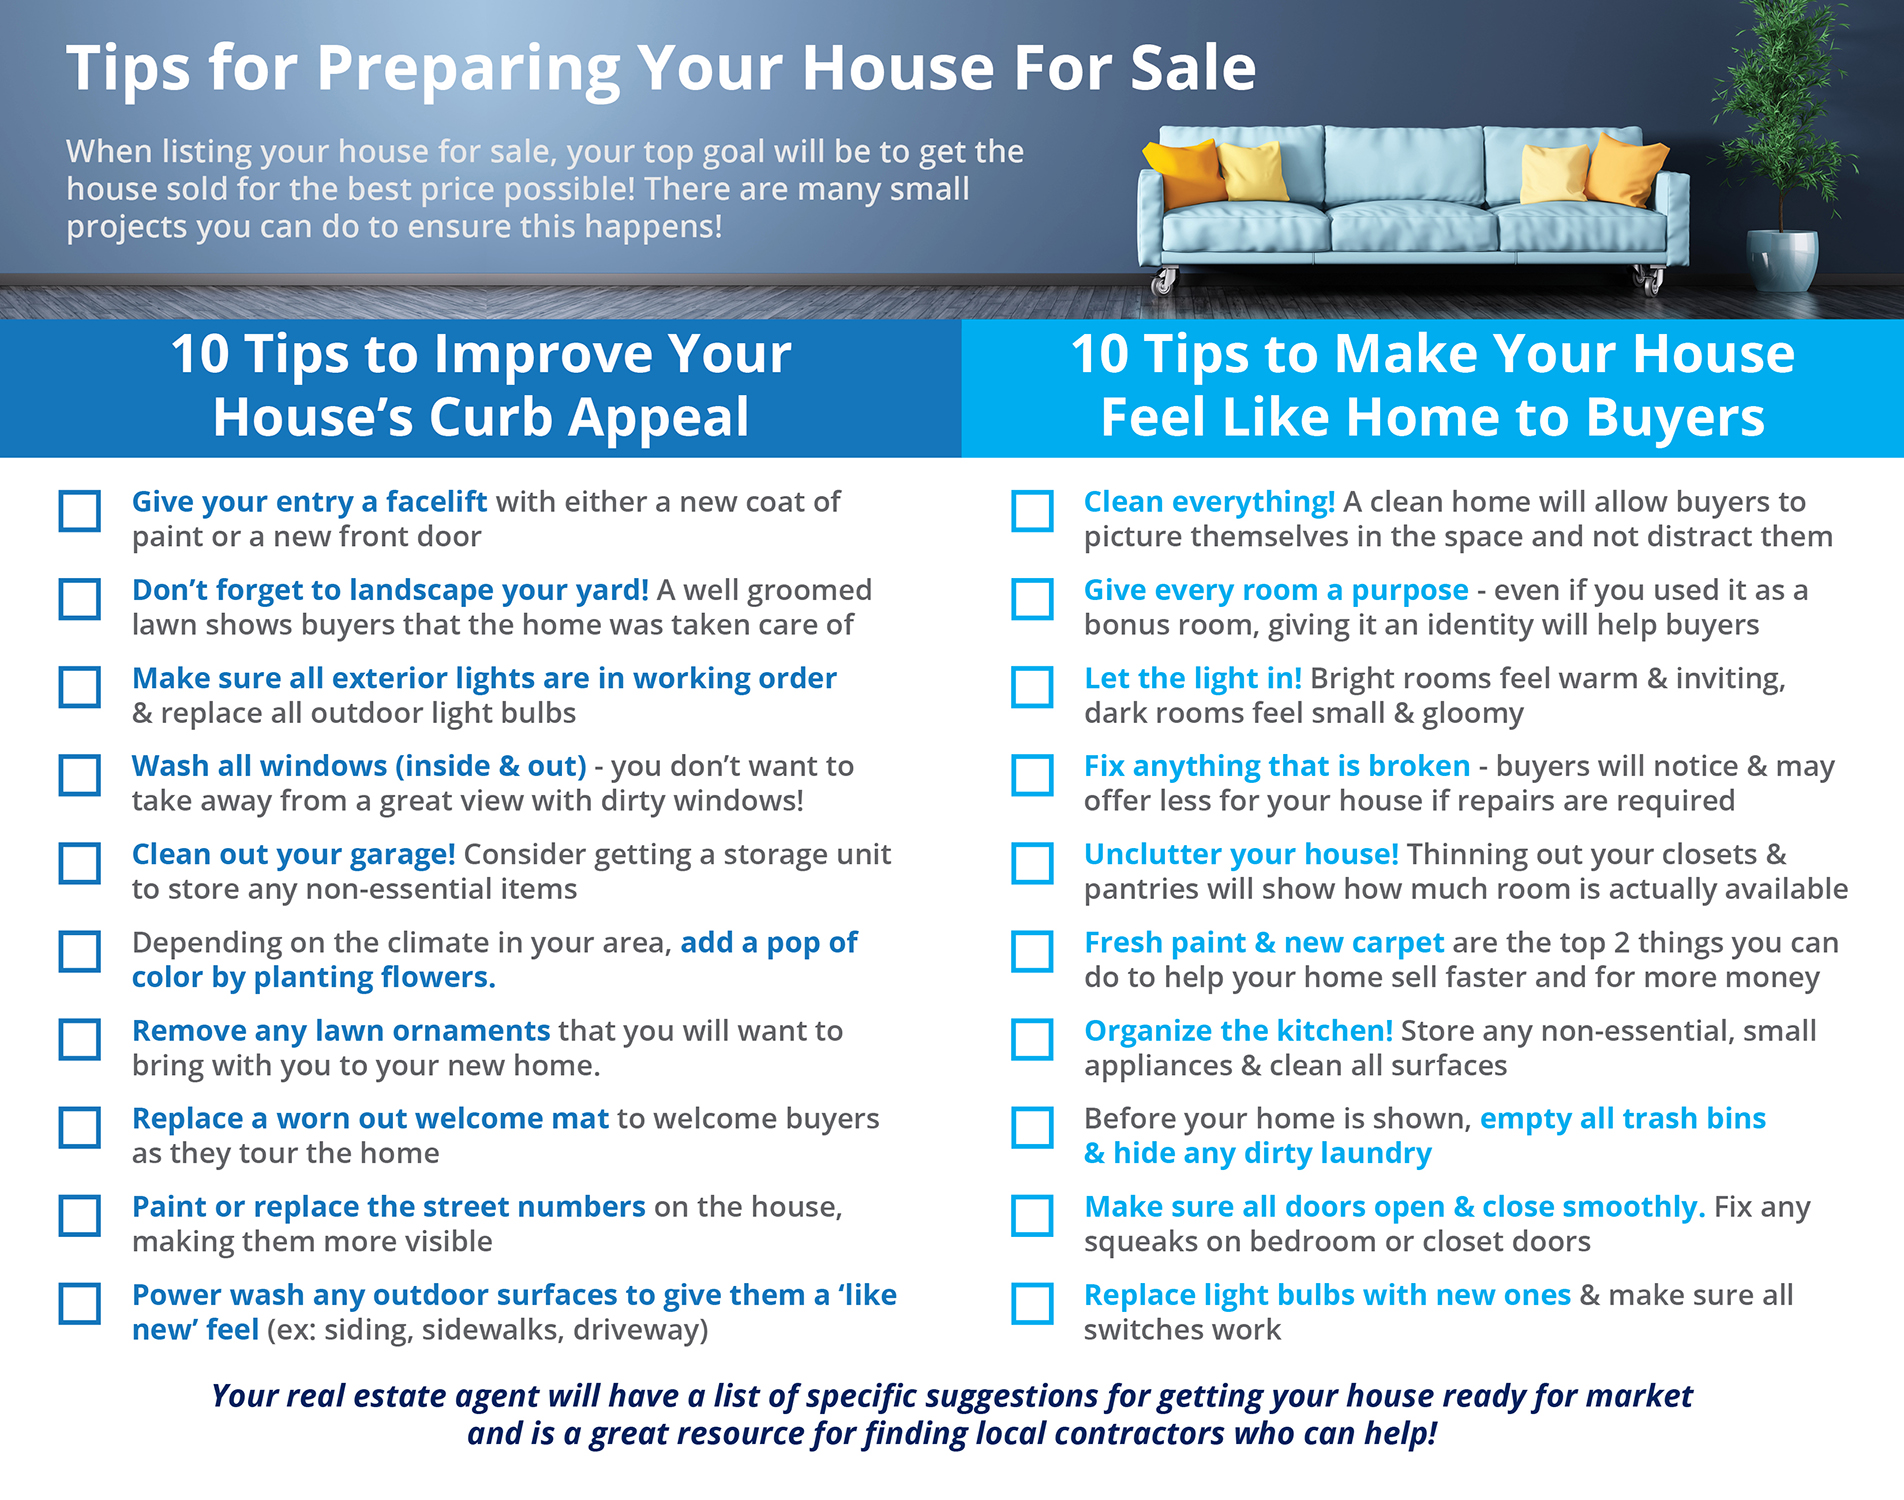 20 Tips for Preparing Your House for Sale [INFOGRAPHIC] | Simplifying The Market